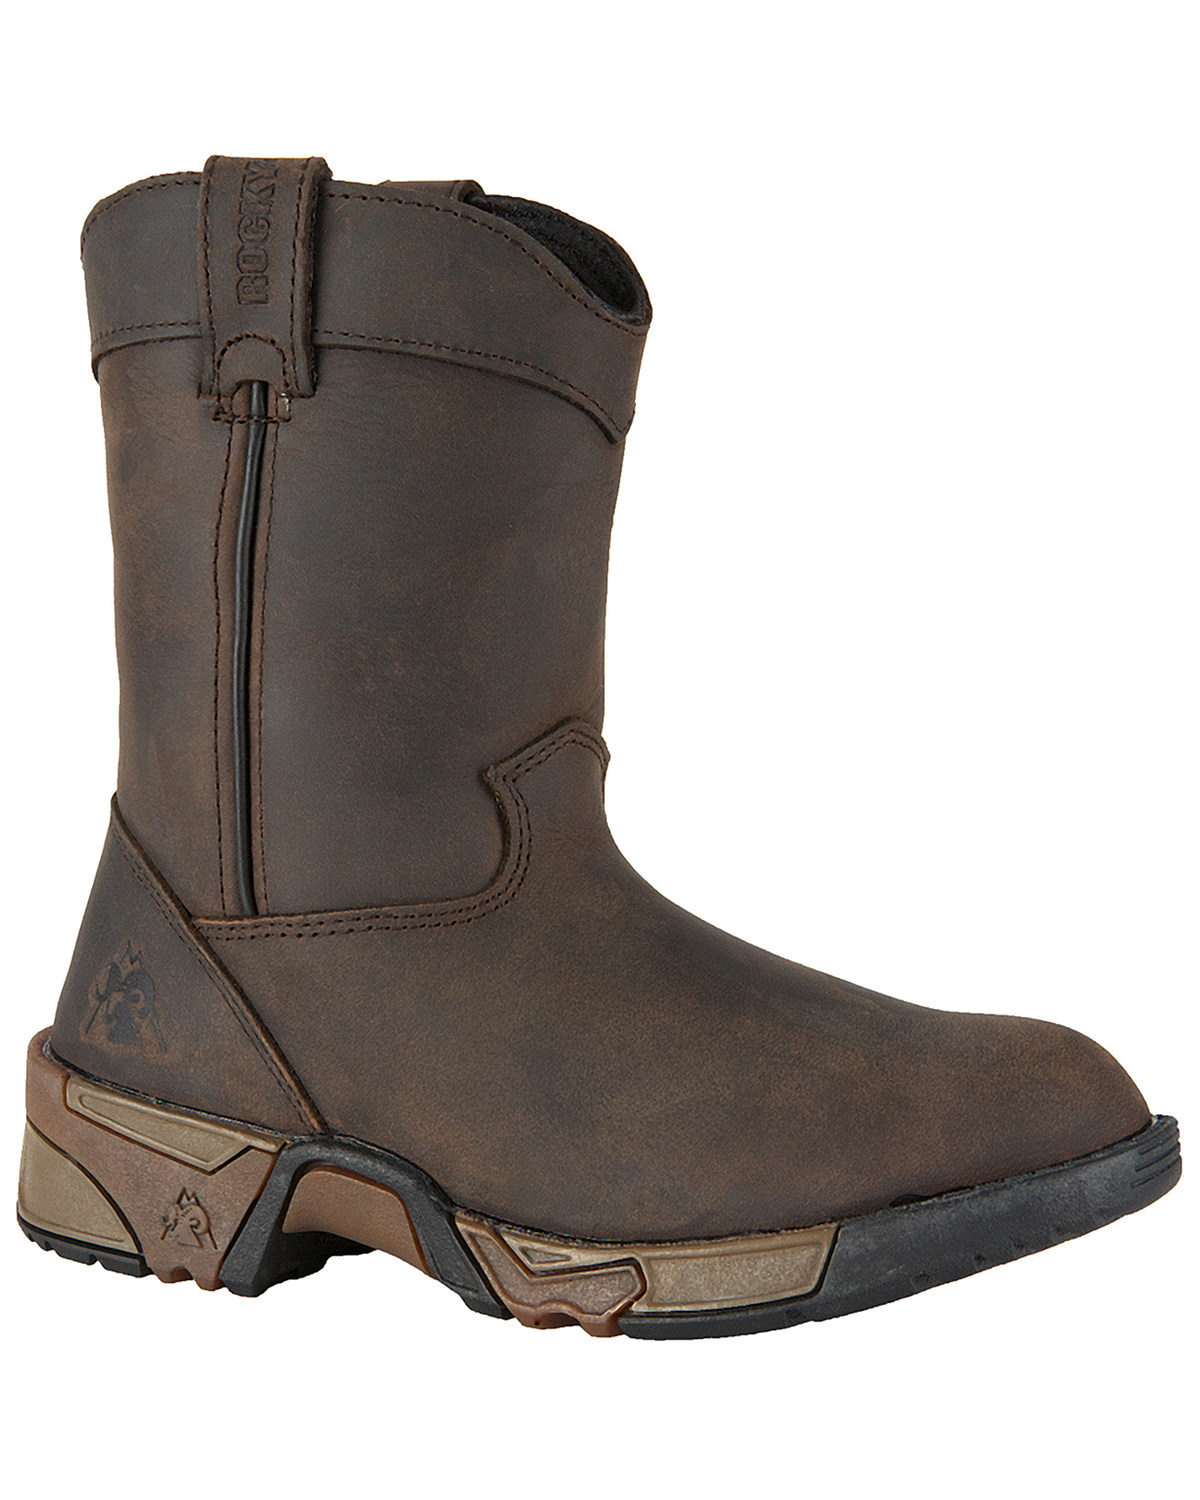 Rocky Boys' Southwest Pull On Boots - Round Toe